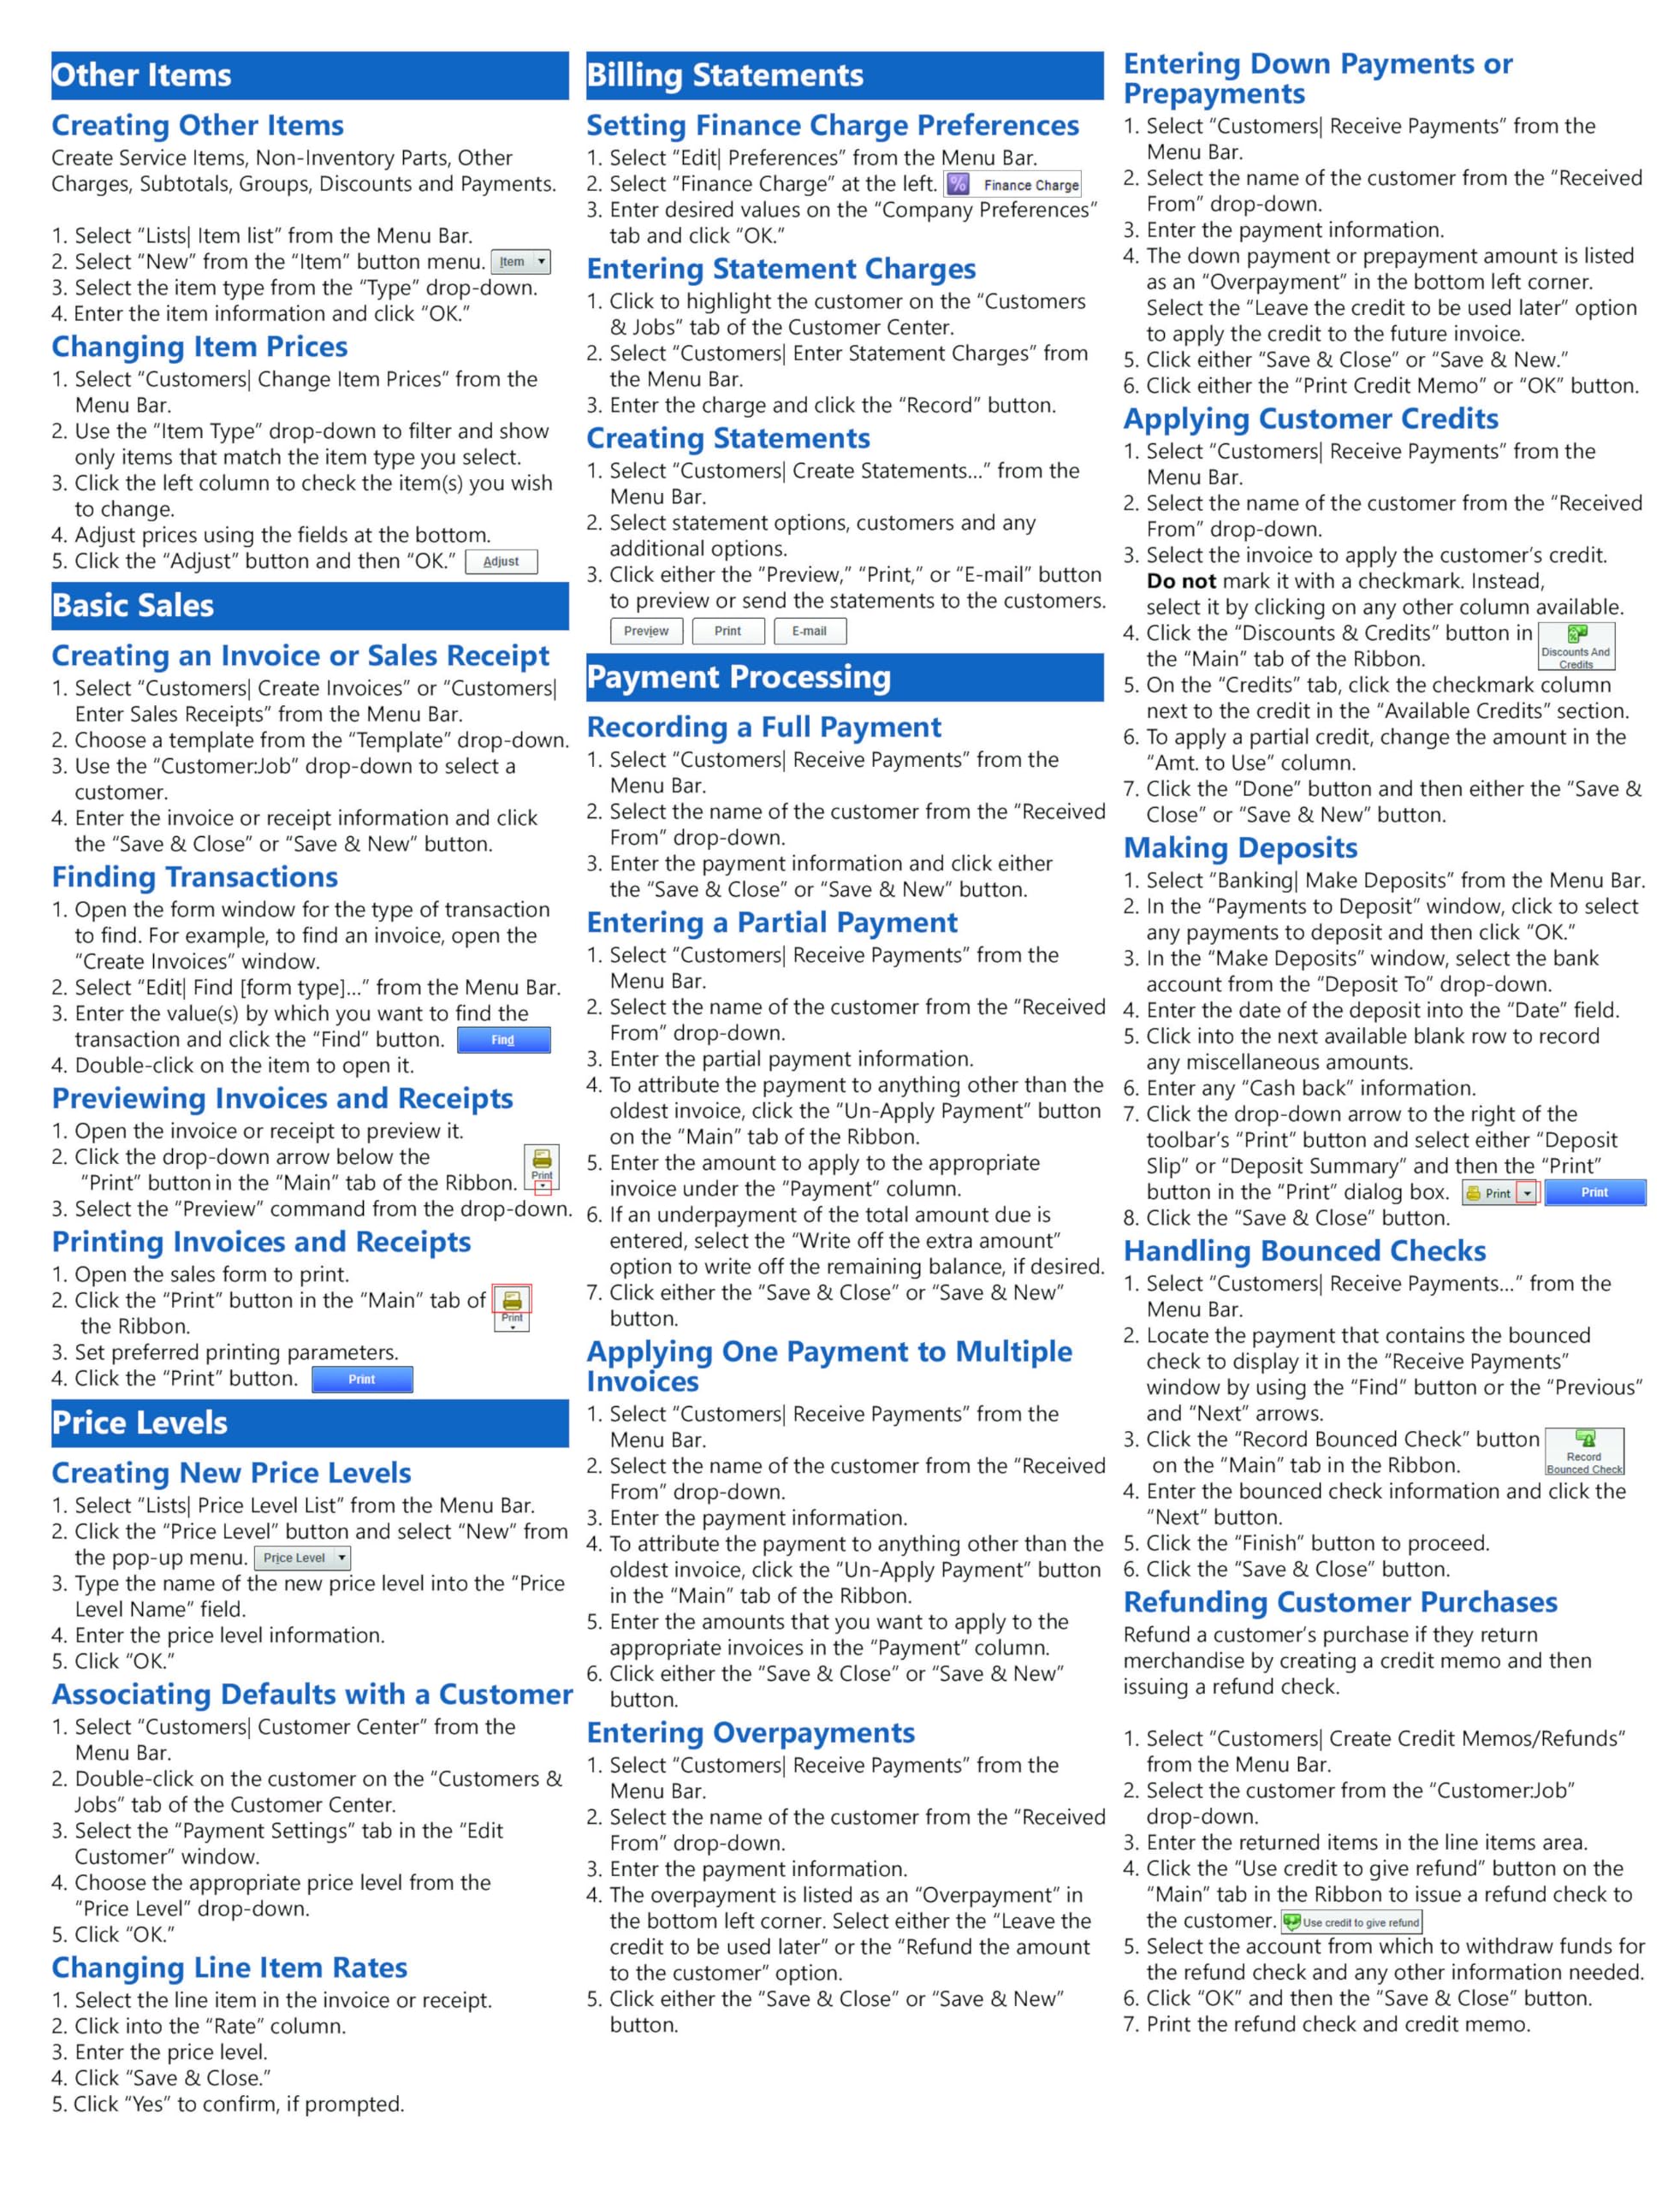 QuickBooks Desktop Pro 2024 Quick Reference Training Card - Laminated Tutorial Guide Cheat Sheet (Instructions and Tips)